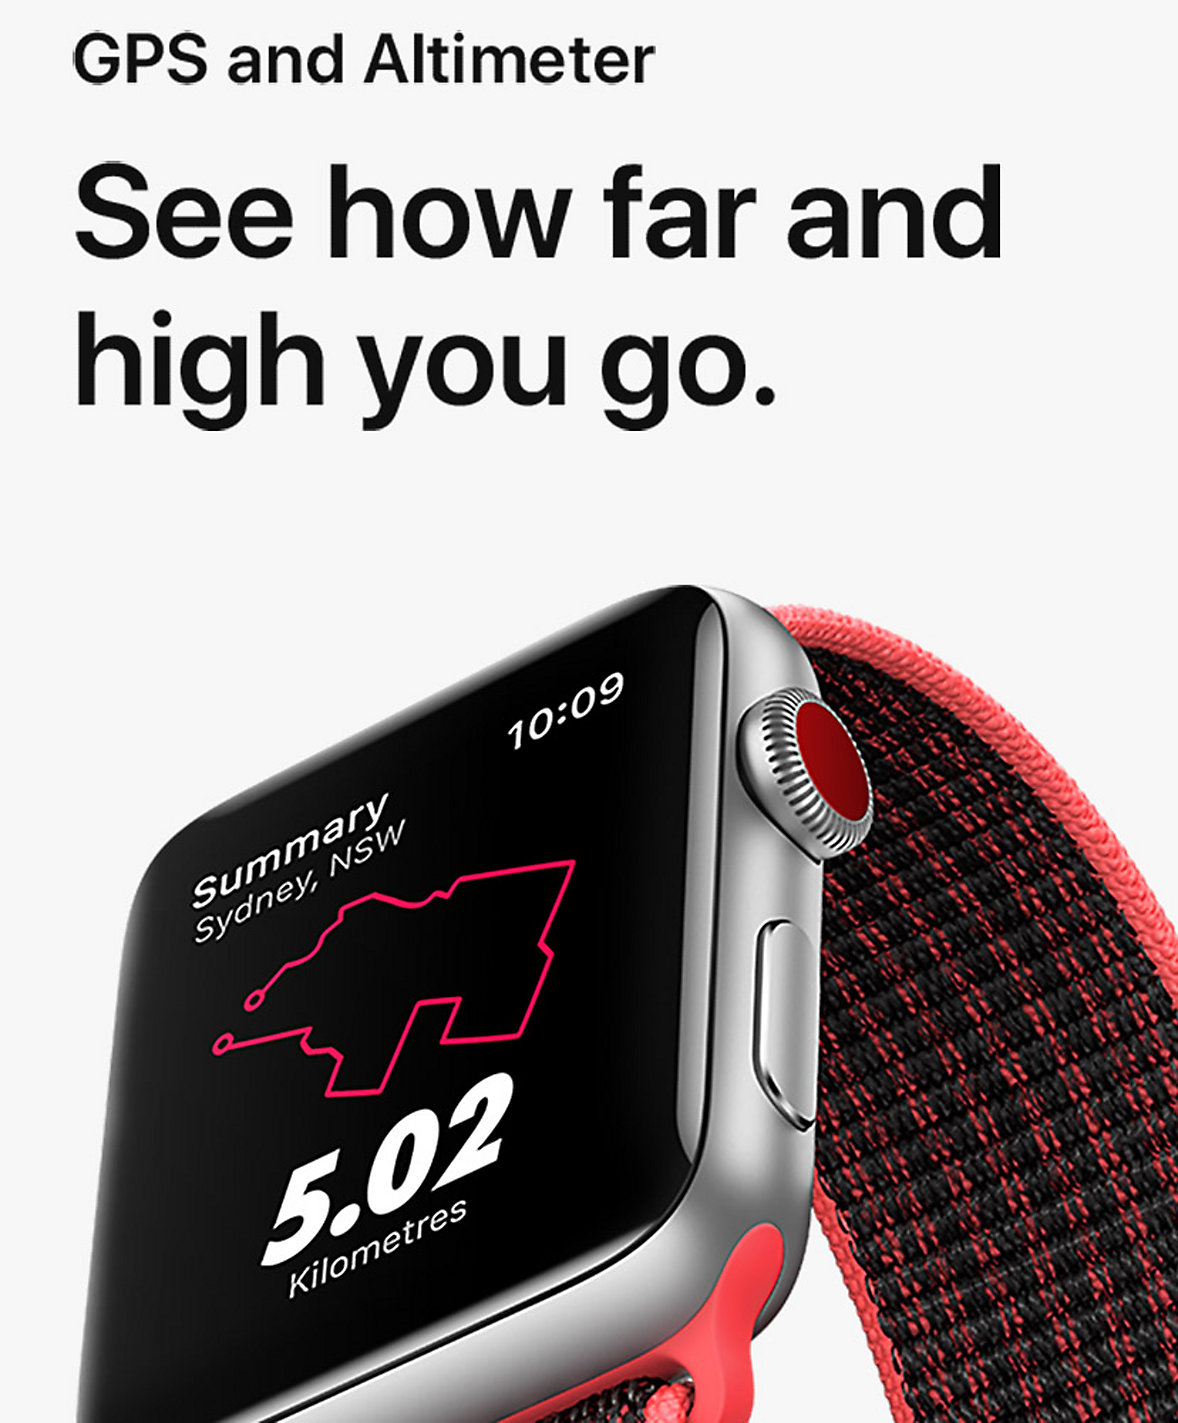 Apple Watch Series 3 product and specifications